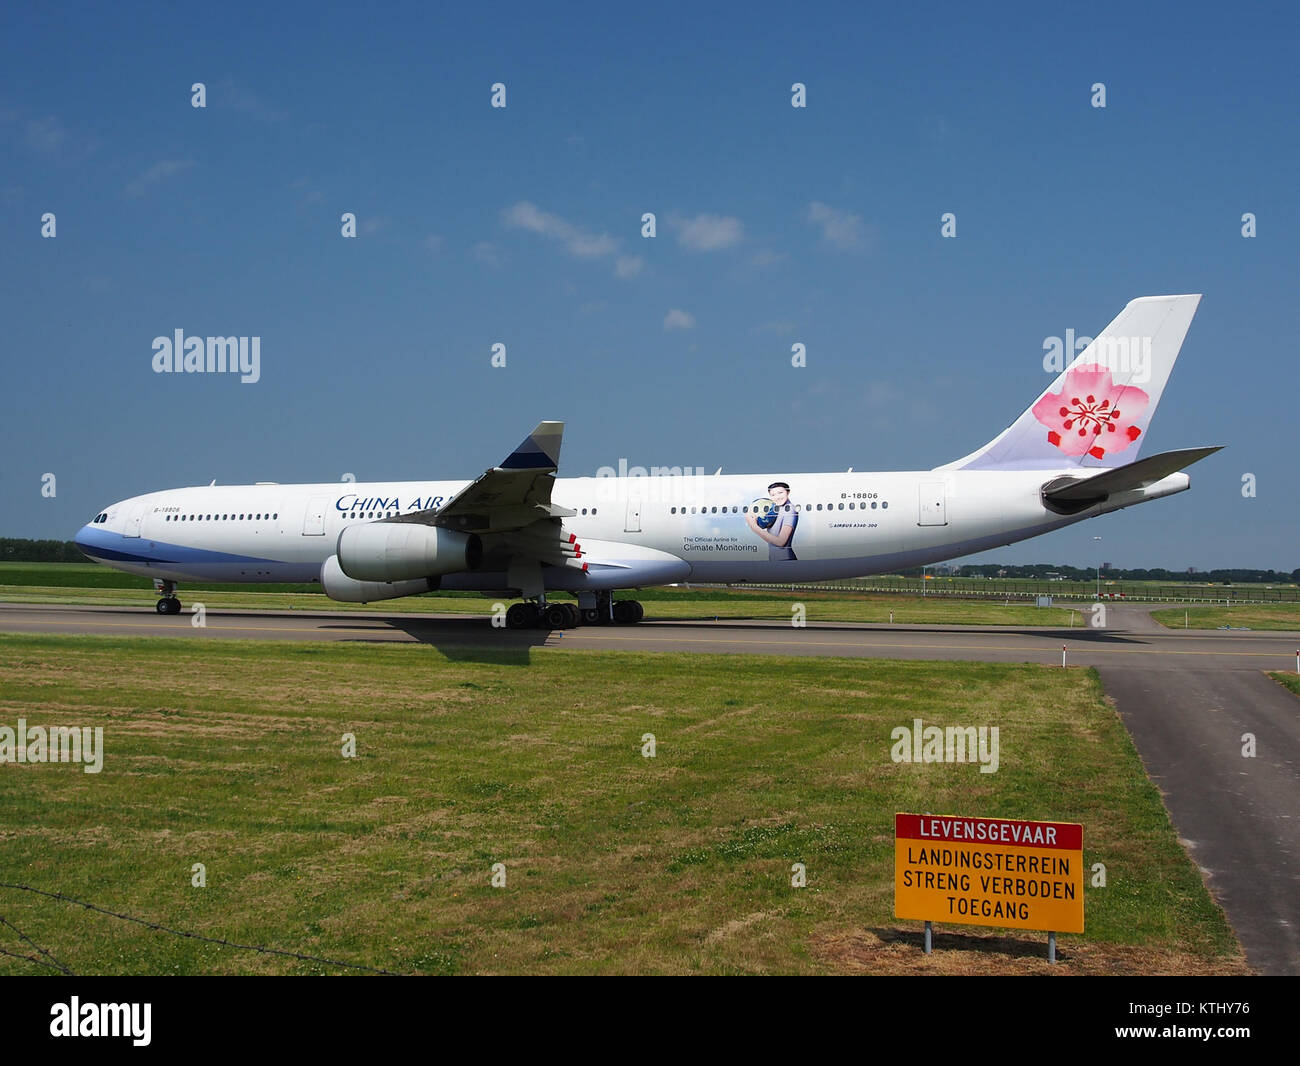 B 18806 China Airlines Airbus A340 313X   cn 433 pic5 Stock Photo